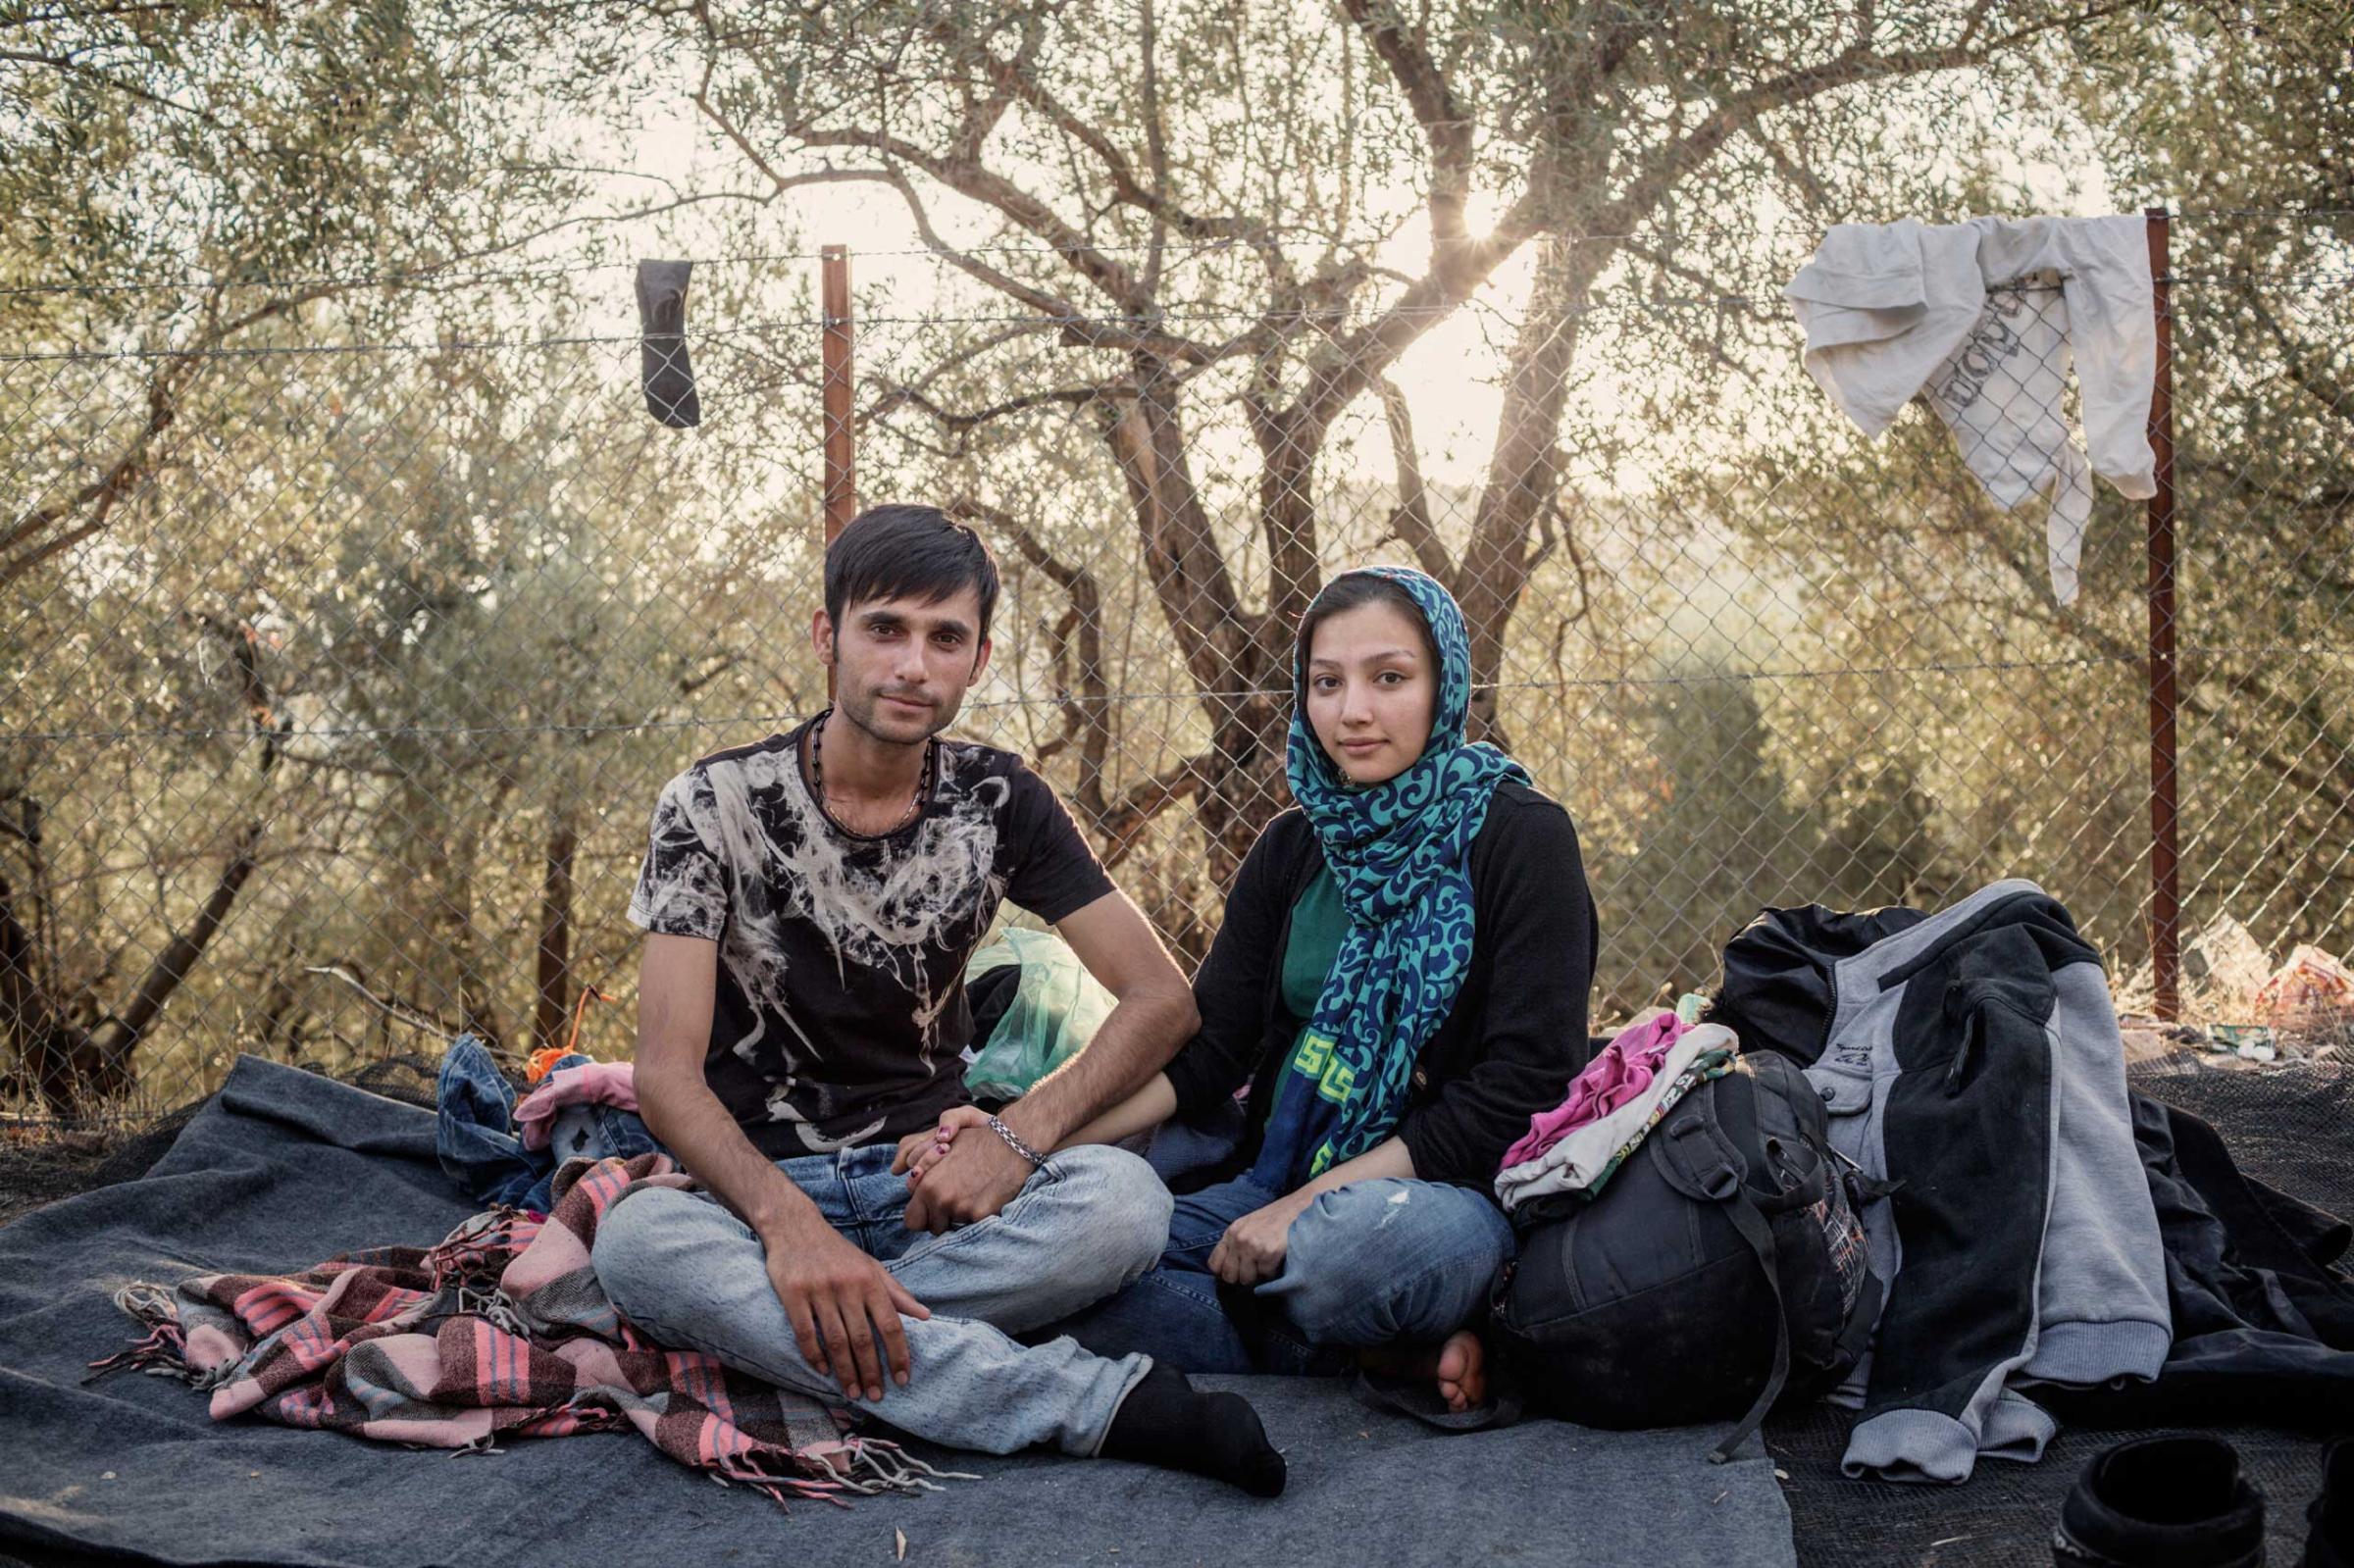 An Afghan couple, 22-year-old Noor Jan and his wife, 19-year-old Parisa, who is seven months pregnant, at the Moria registration center on the Greek island of Lesbos, where migrants and refugees wait for their papers for several days. Oct. 20, 2015.